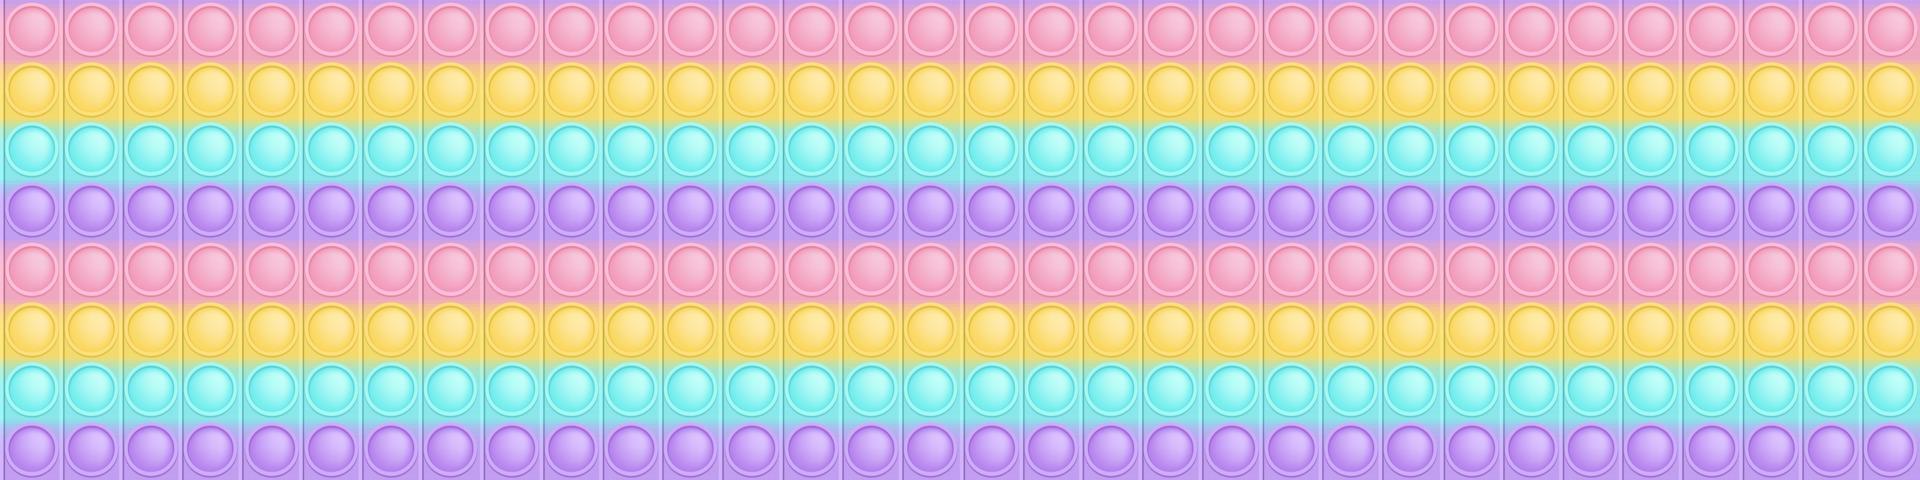 Popping toy wide background a cartoon trendy silicon fidget toys. Addictive bubble toy in pastel colors. Vector illustration in rectangle format for banner.